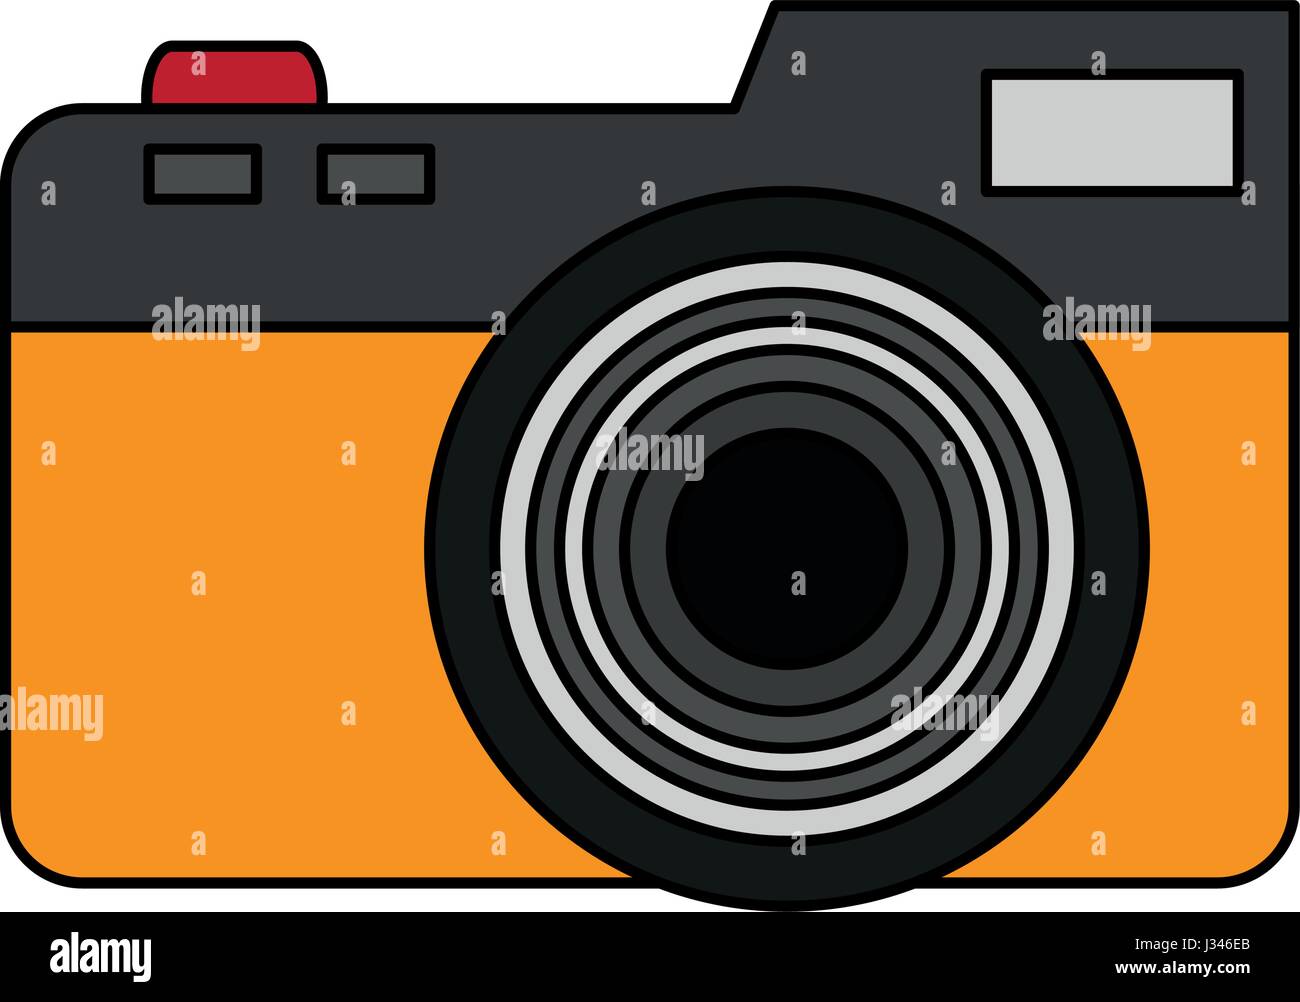 color image cartoon analog camera with flash Stock Vector